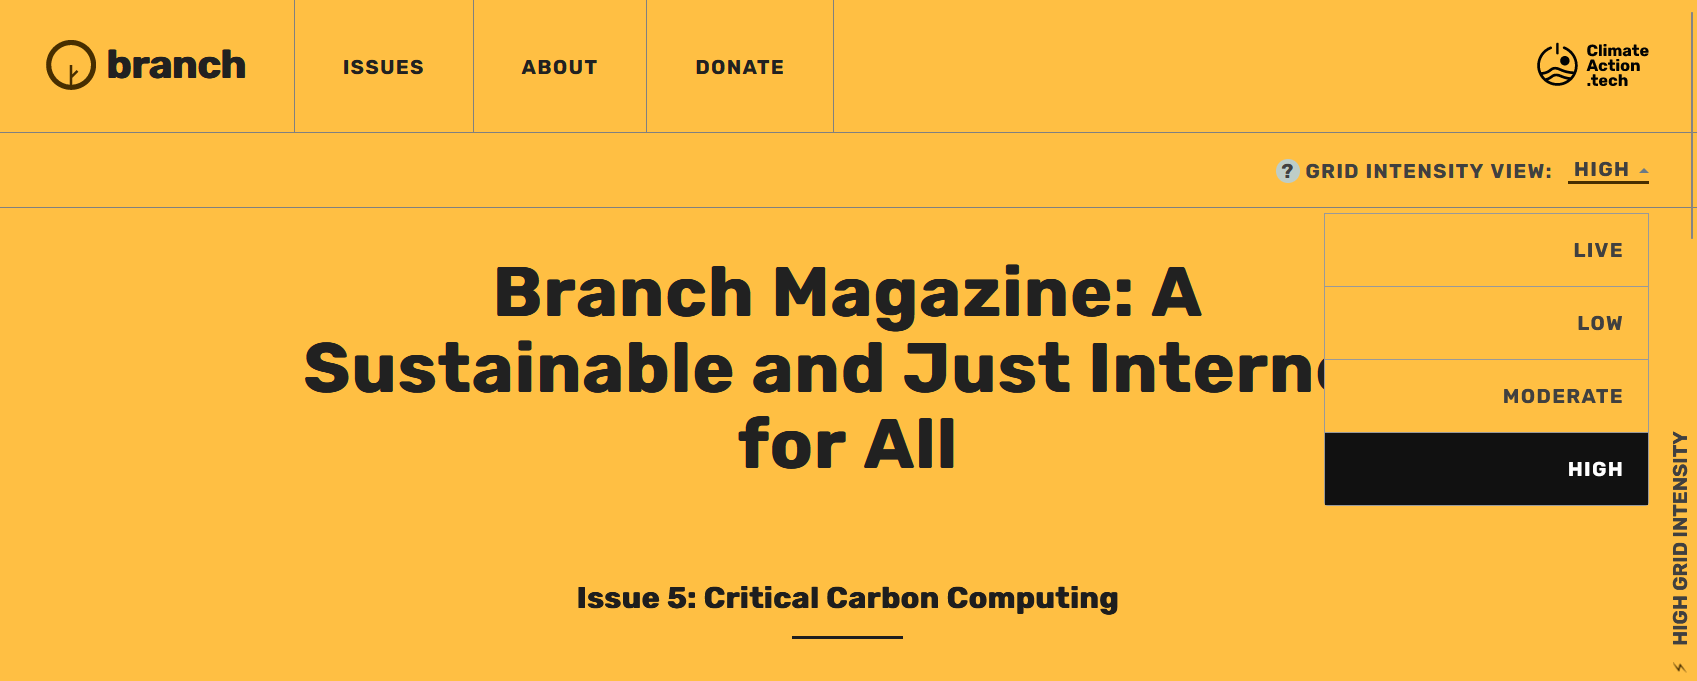 Image showing a homepage of the Branch magazine with a dropdown menu on the right showing the Grid intensity view: live, low, moderate, and high. High is marked as the current setting.